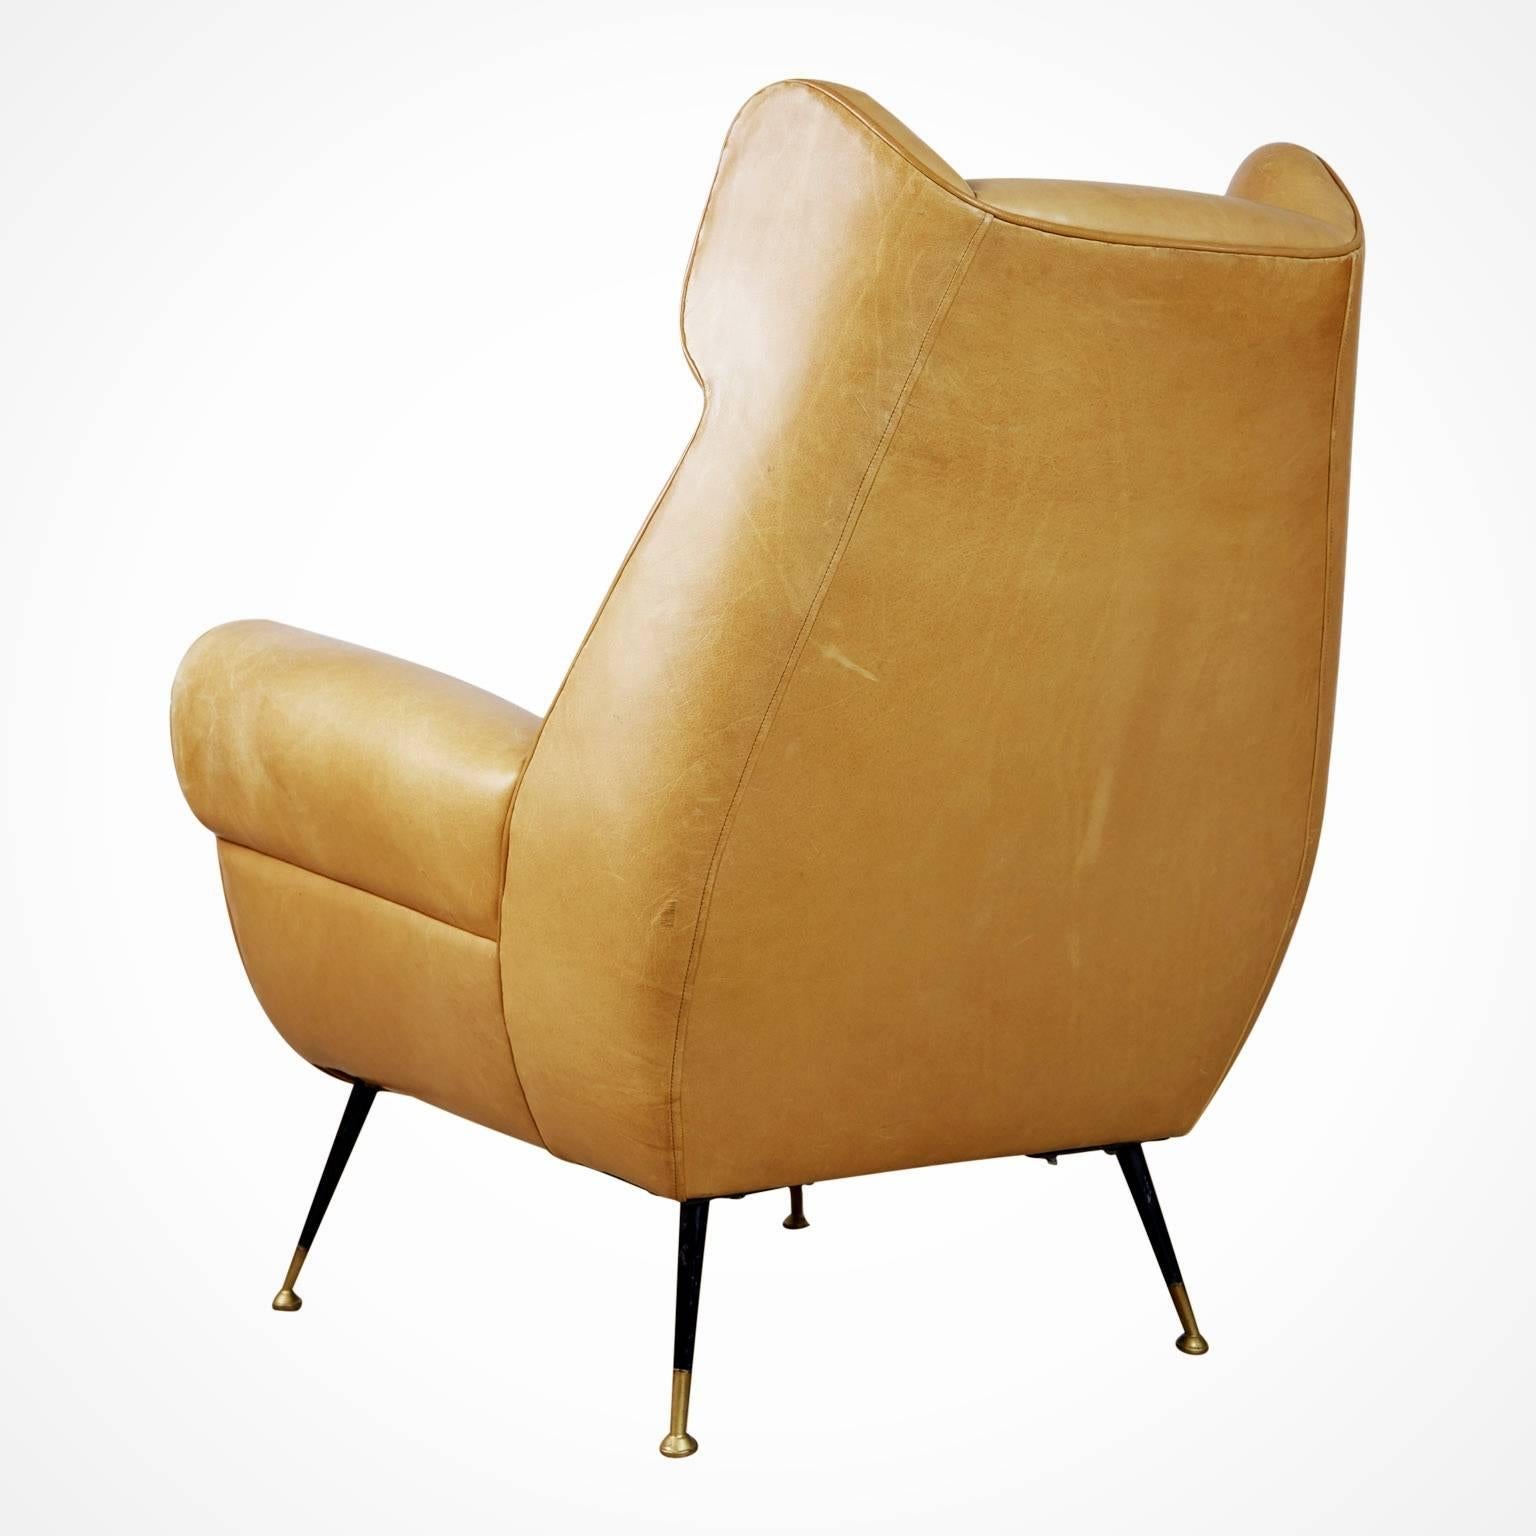 Gigi Radice for Minotti Leather Wingback Chairs, Pair, Italy circa 1960 im Zustand „Gut“ in Los Angeles, CA